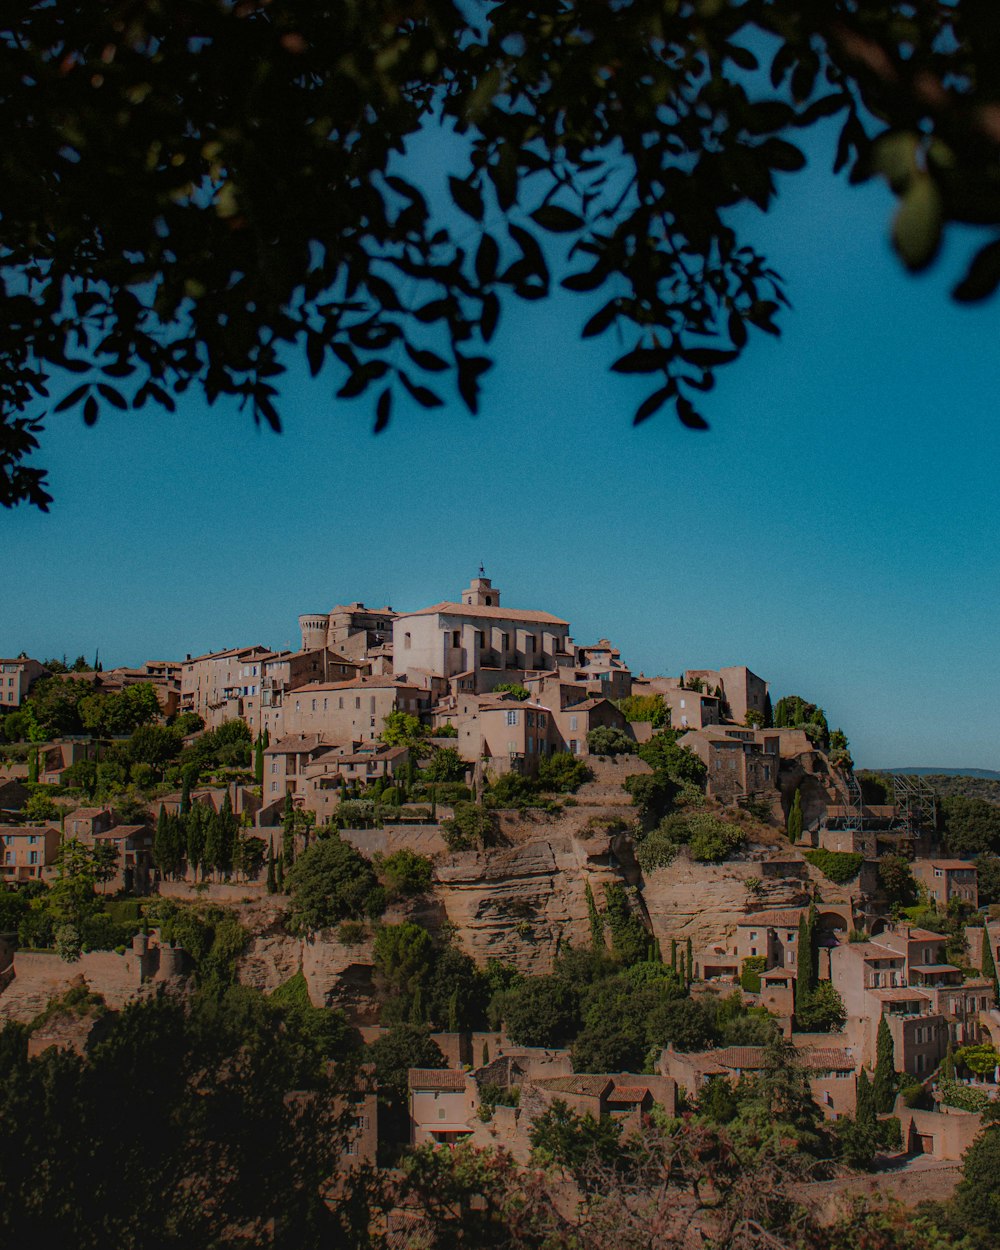 a village on top of a hill surrounded by trees